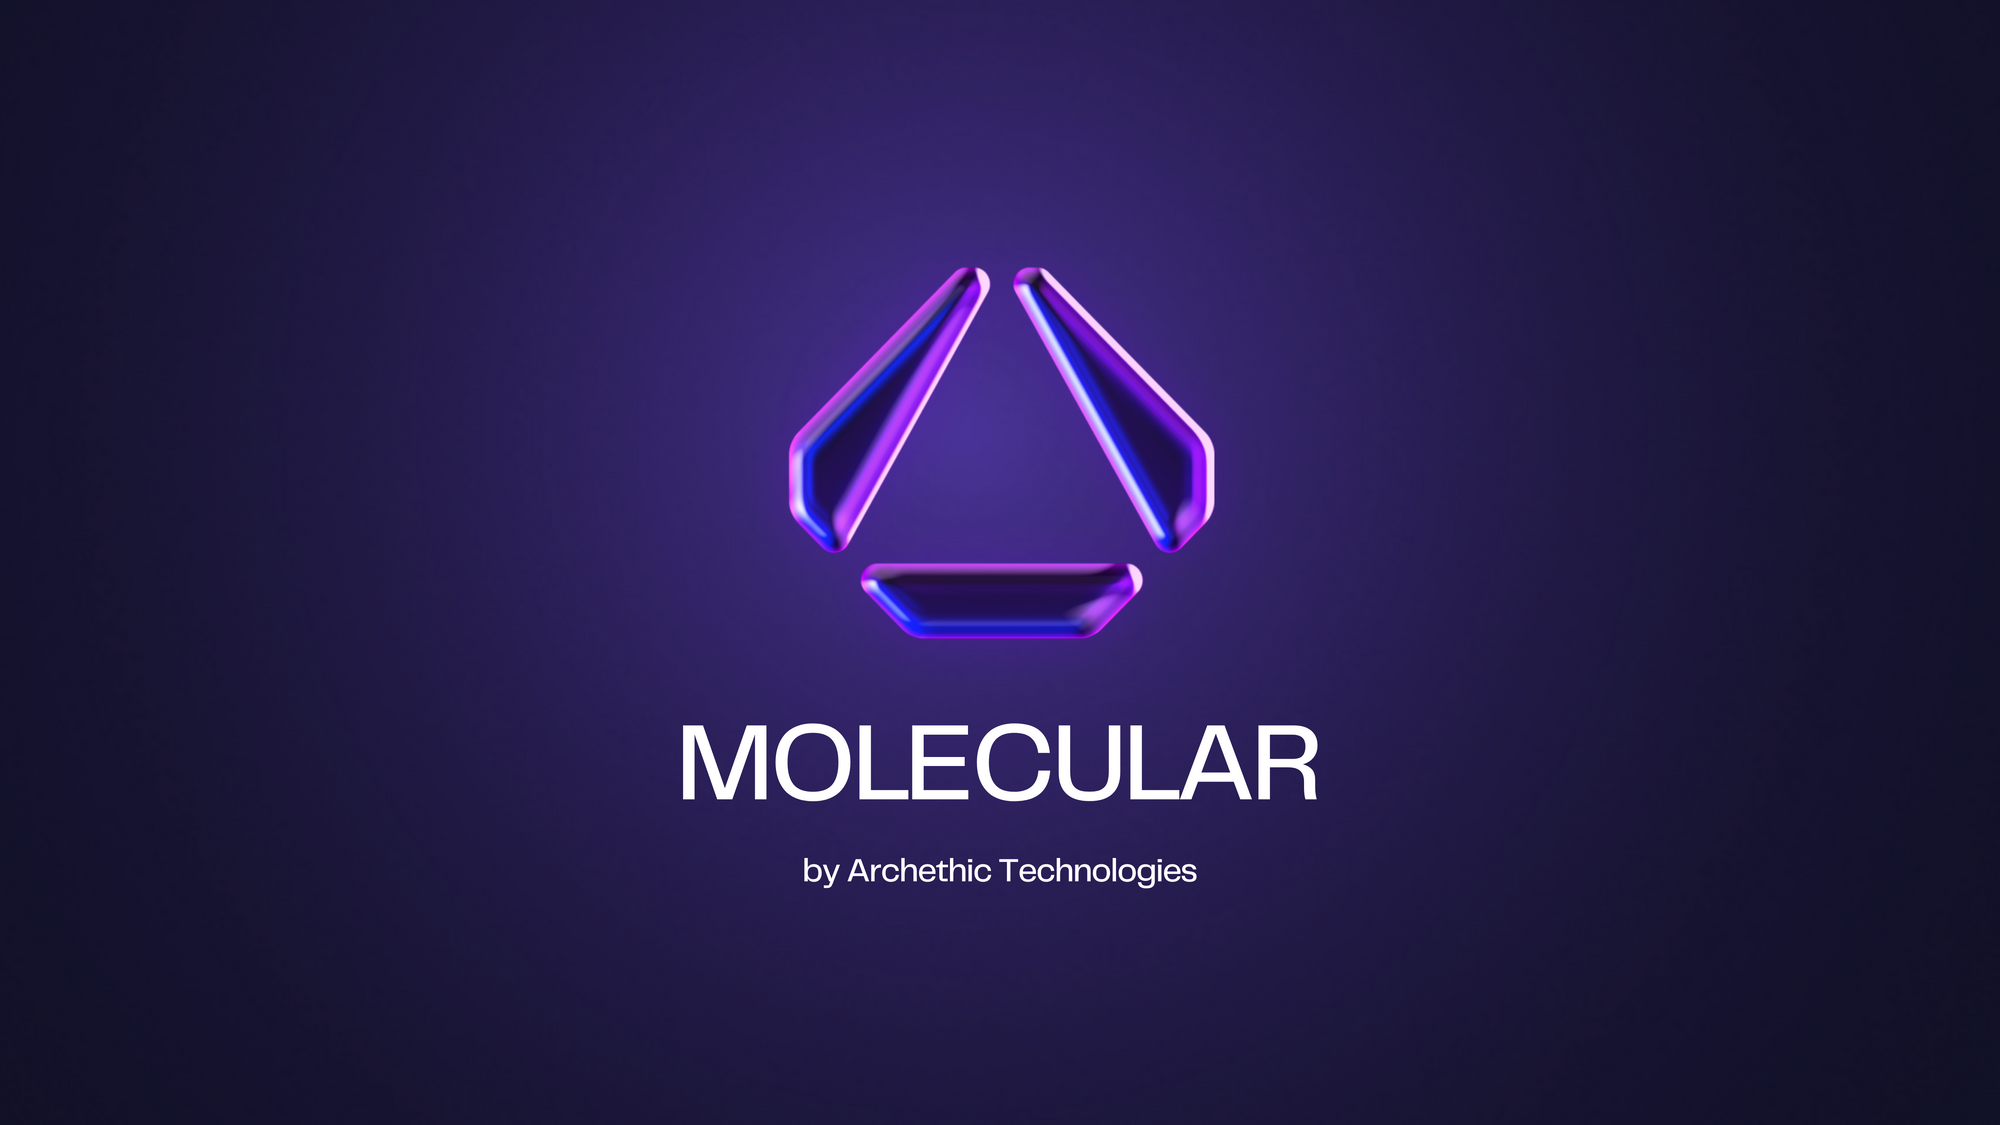 PRESS RELEASE: Molecular, by Archethic Technologies